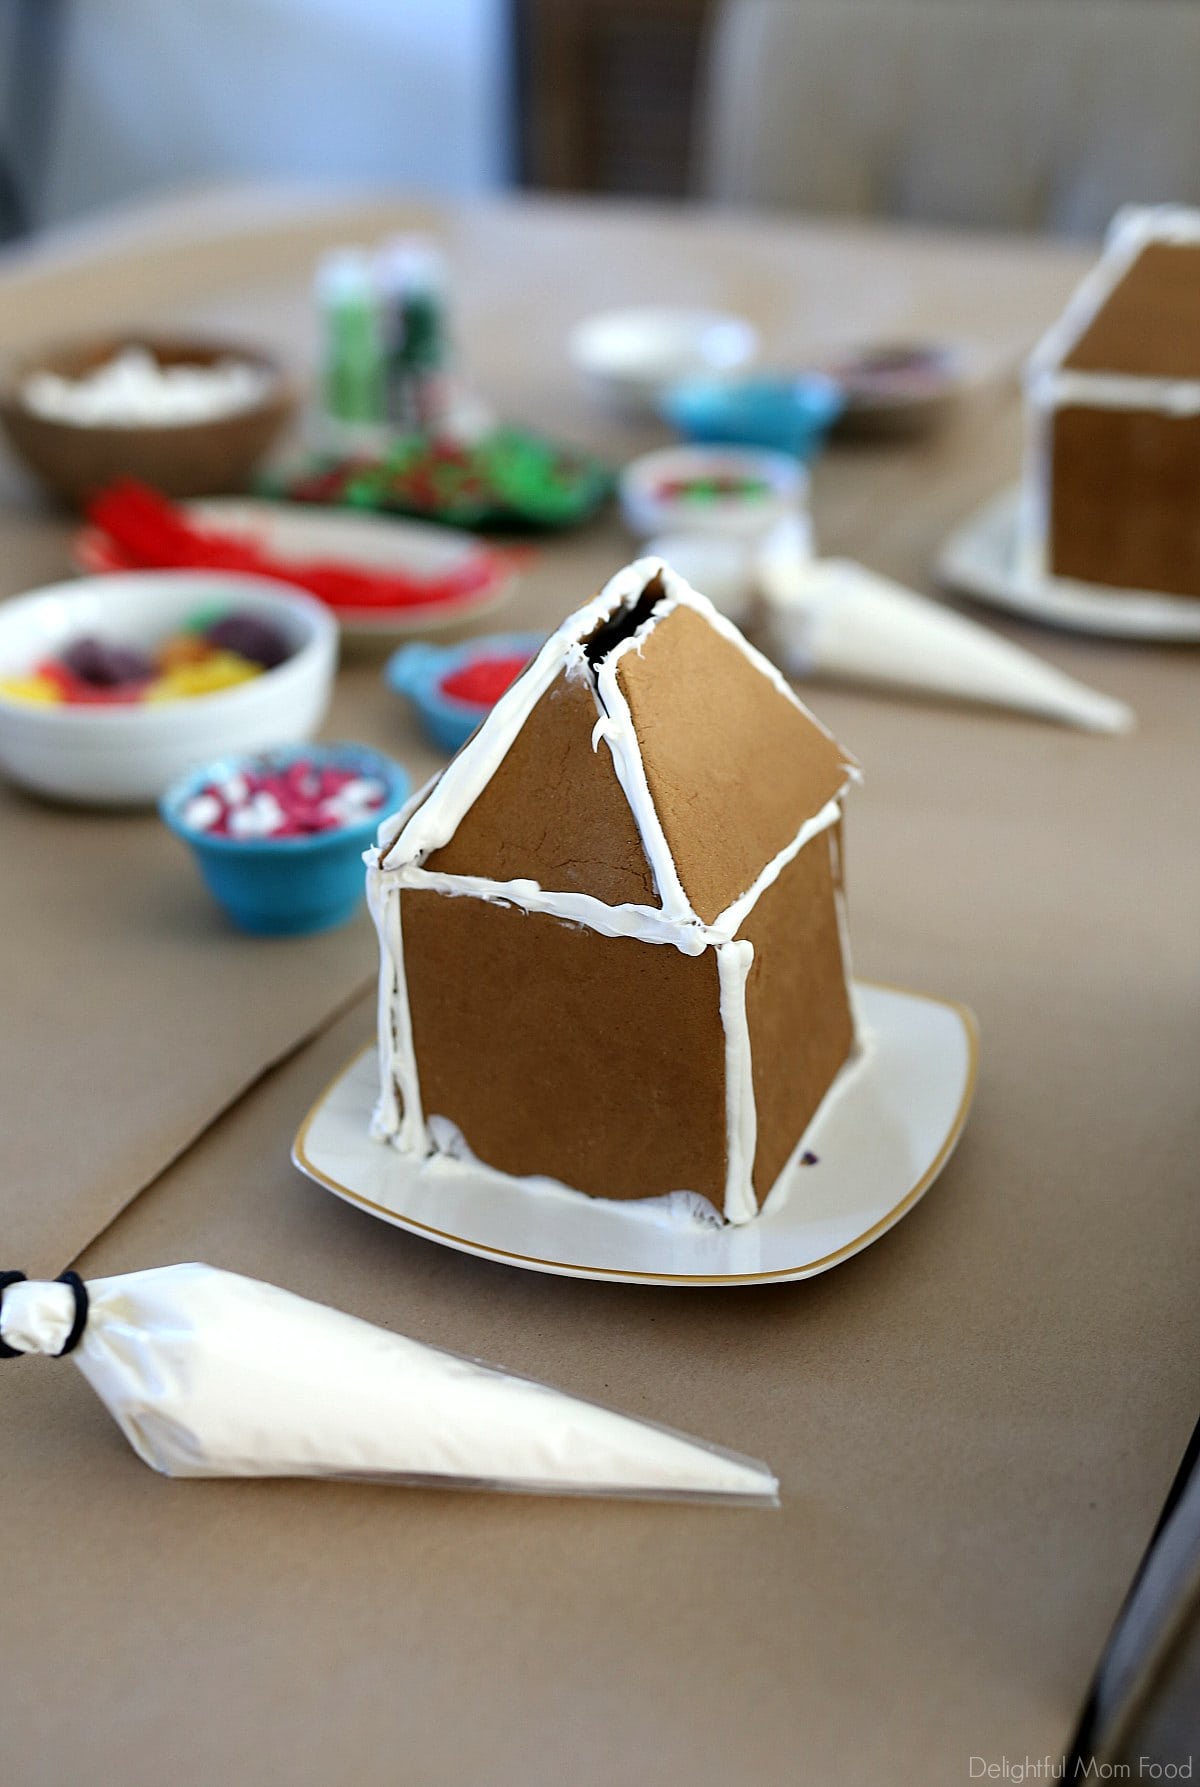 putting together a gingerbread house